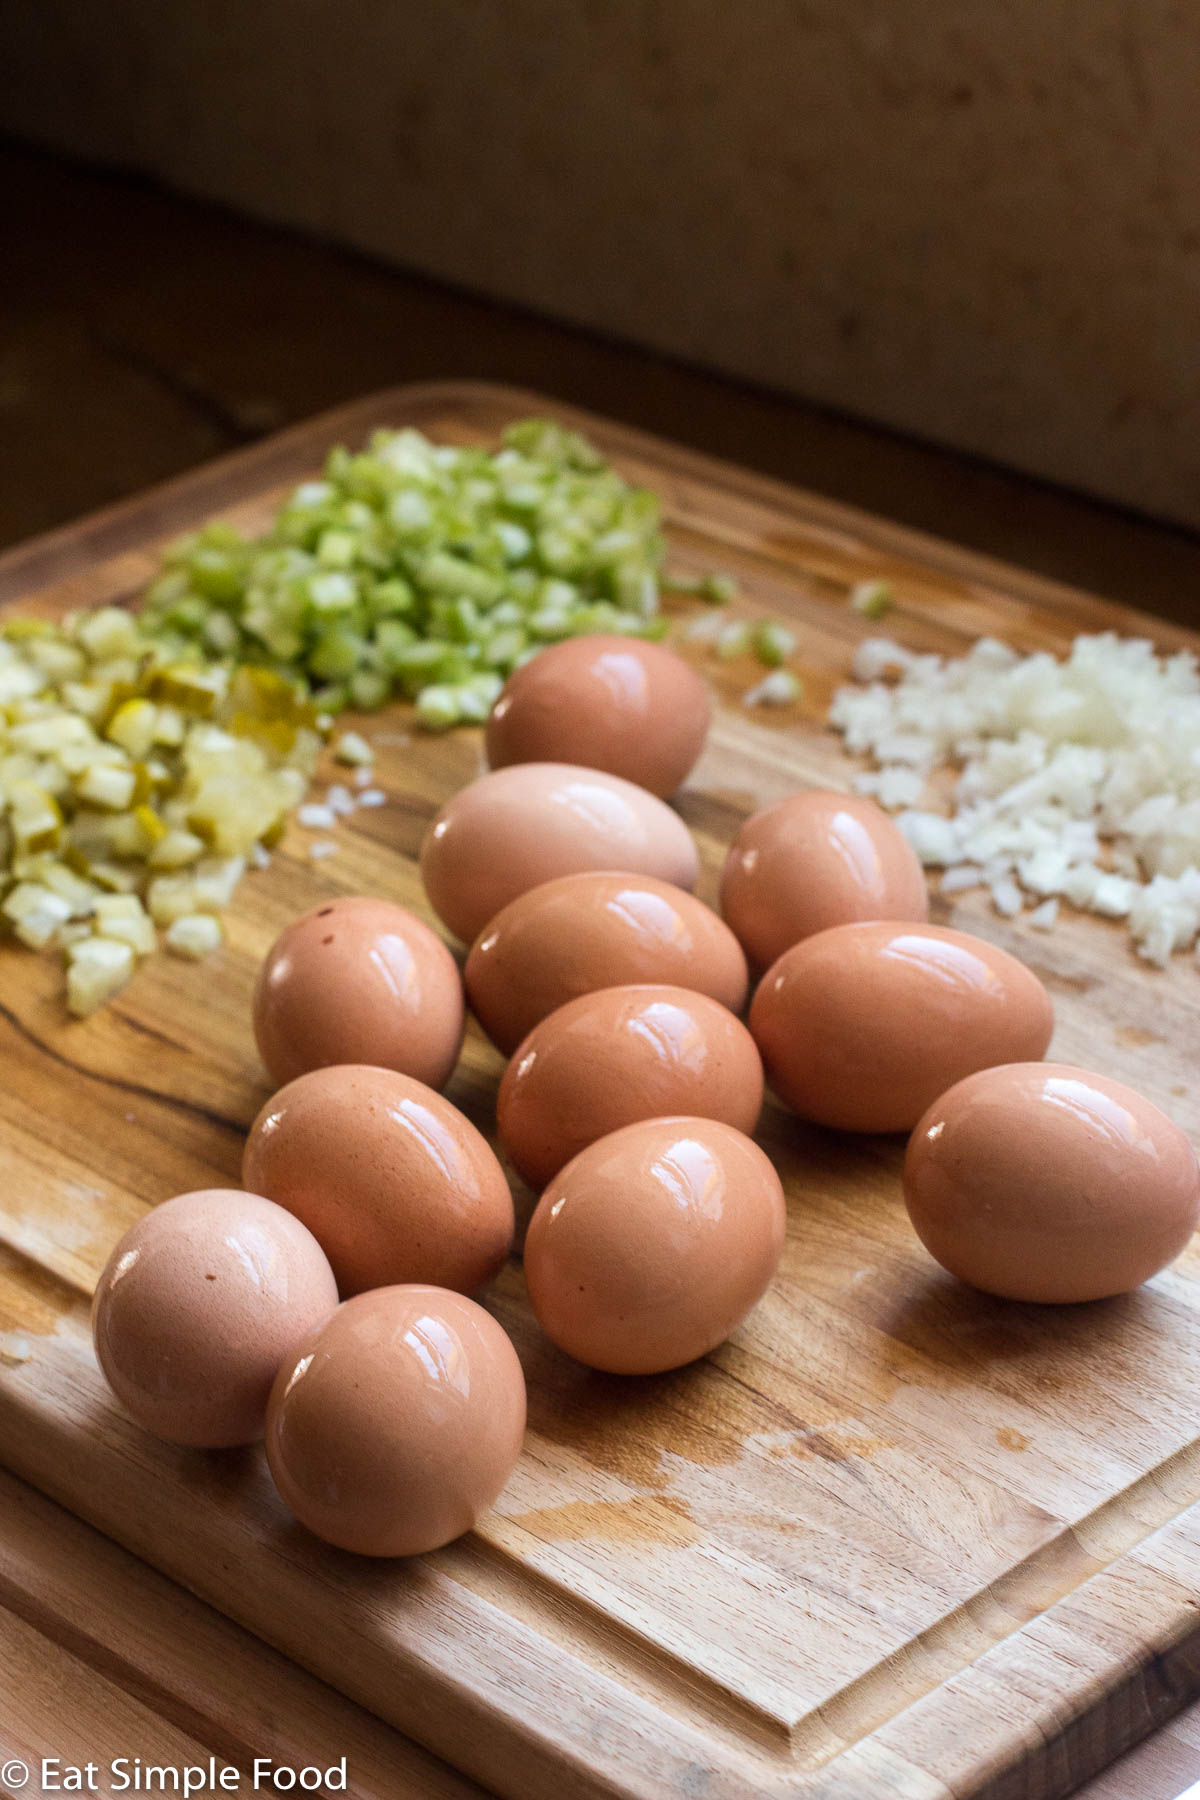 12 boiled eggs on a wood cutting board with chopped pickles, onions, and celery in the background.